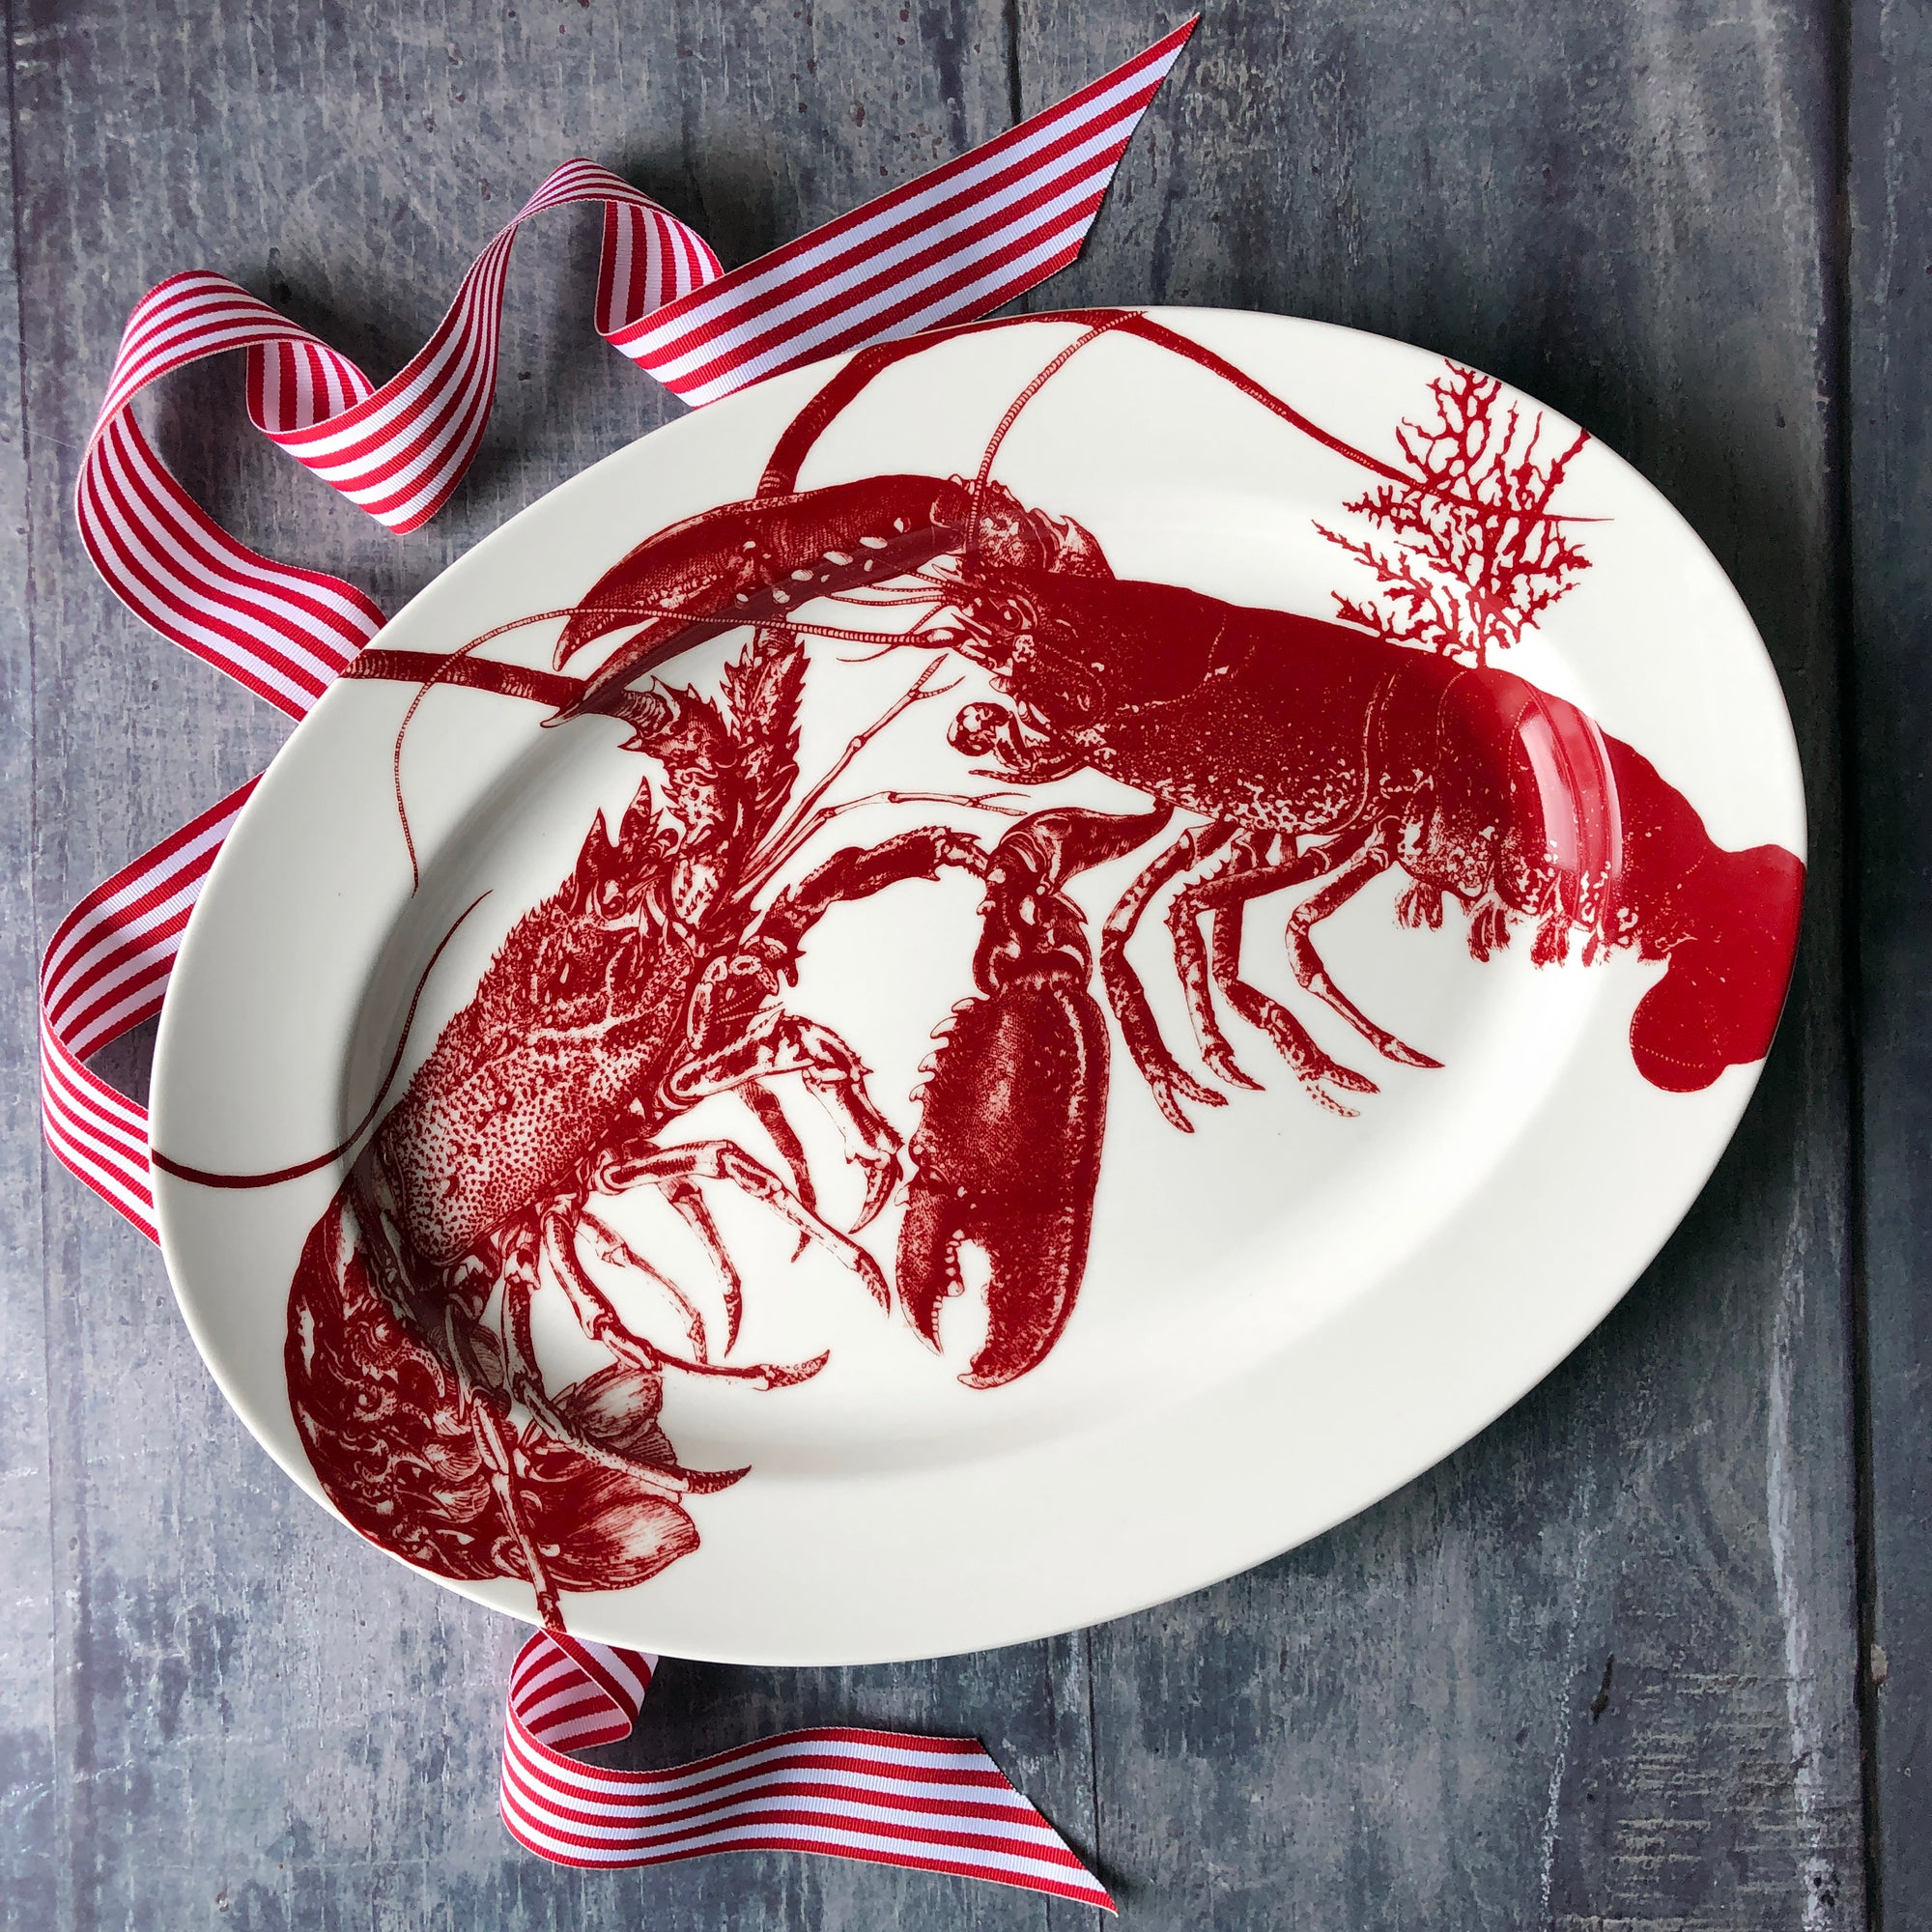 A set of tableware featuring charming red lobster designs, including four lobster mugs, a large lobster platter, and two cloth napkins is now available as the Father's Day Bundle from Caskata.